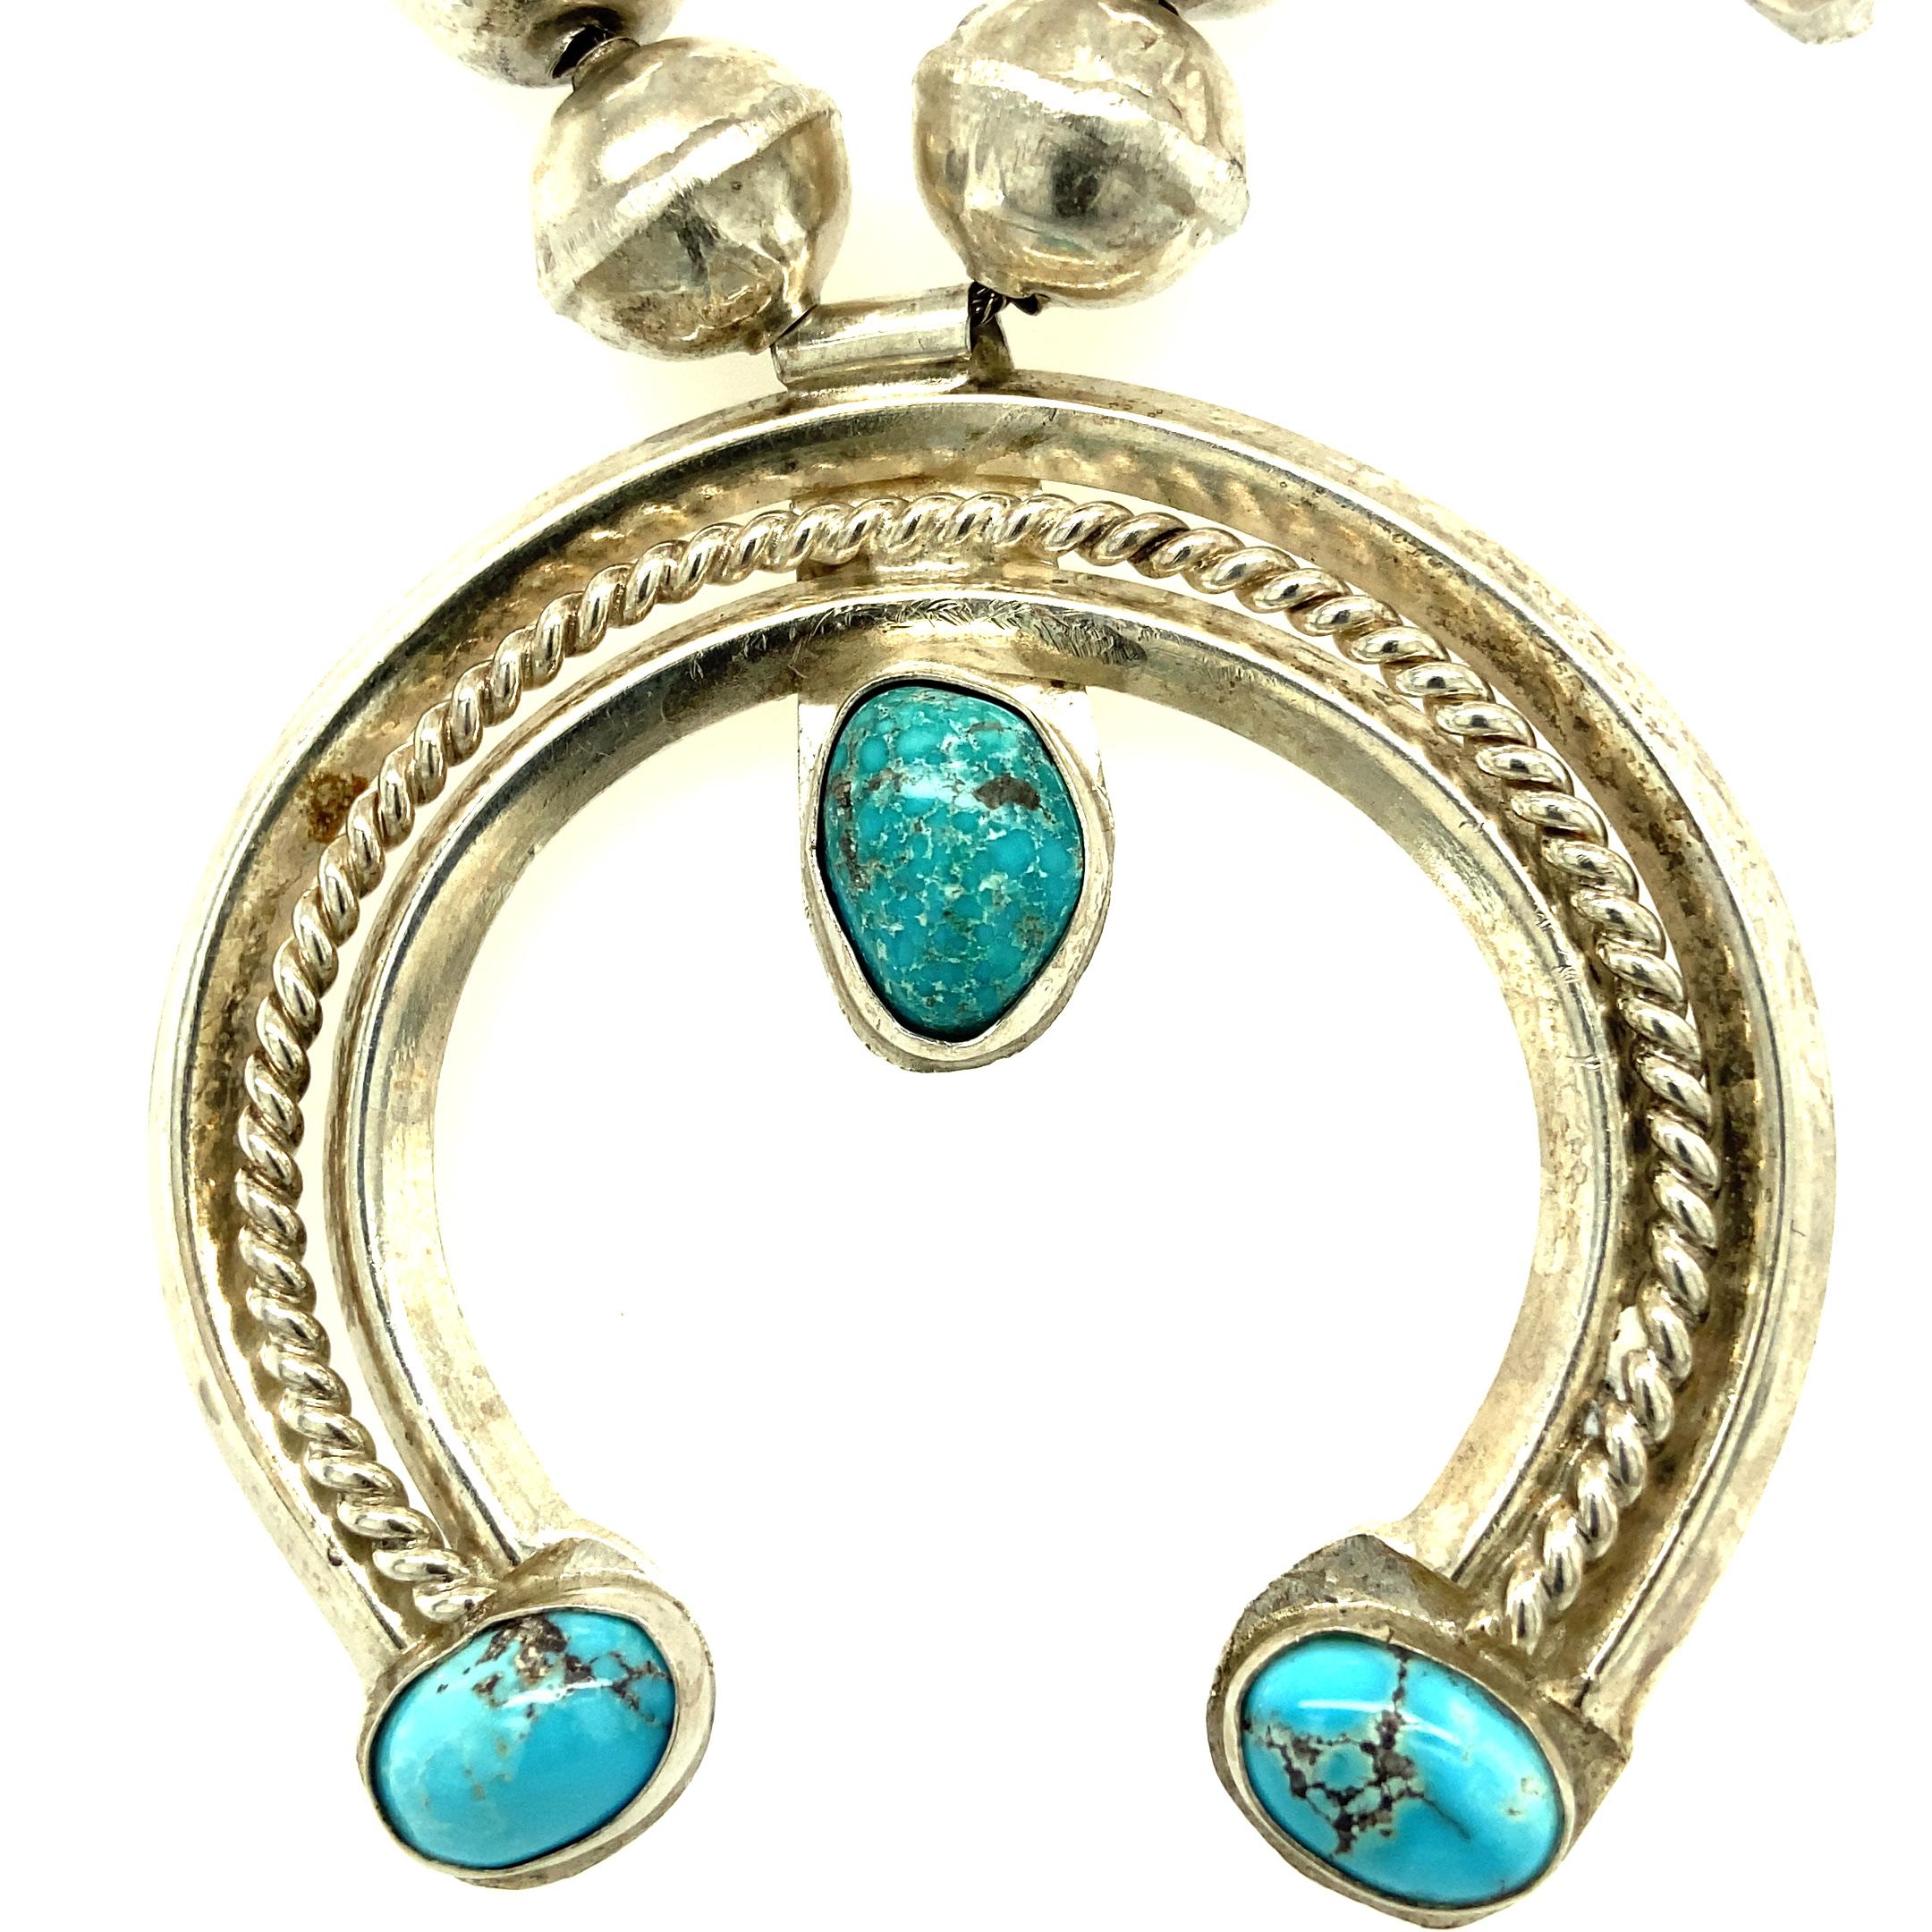 Round Cut Sterling Silver and Turquoise Squash Blossom